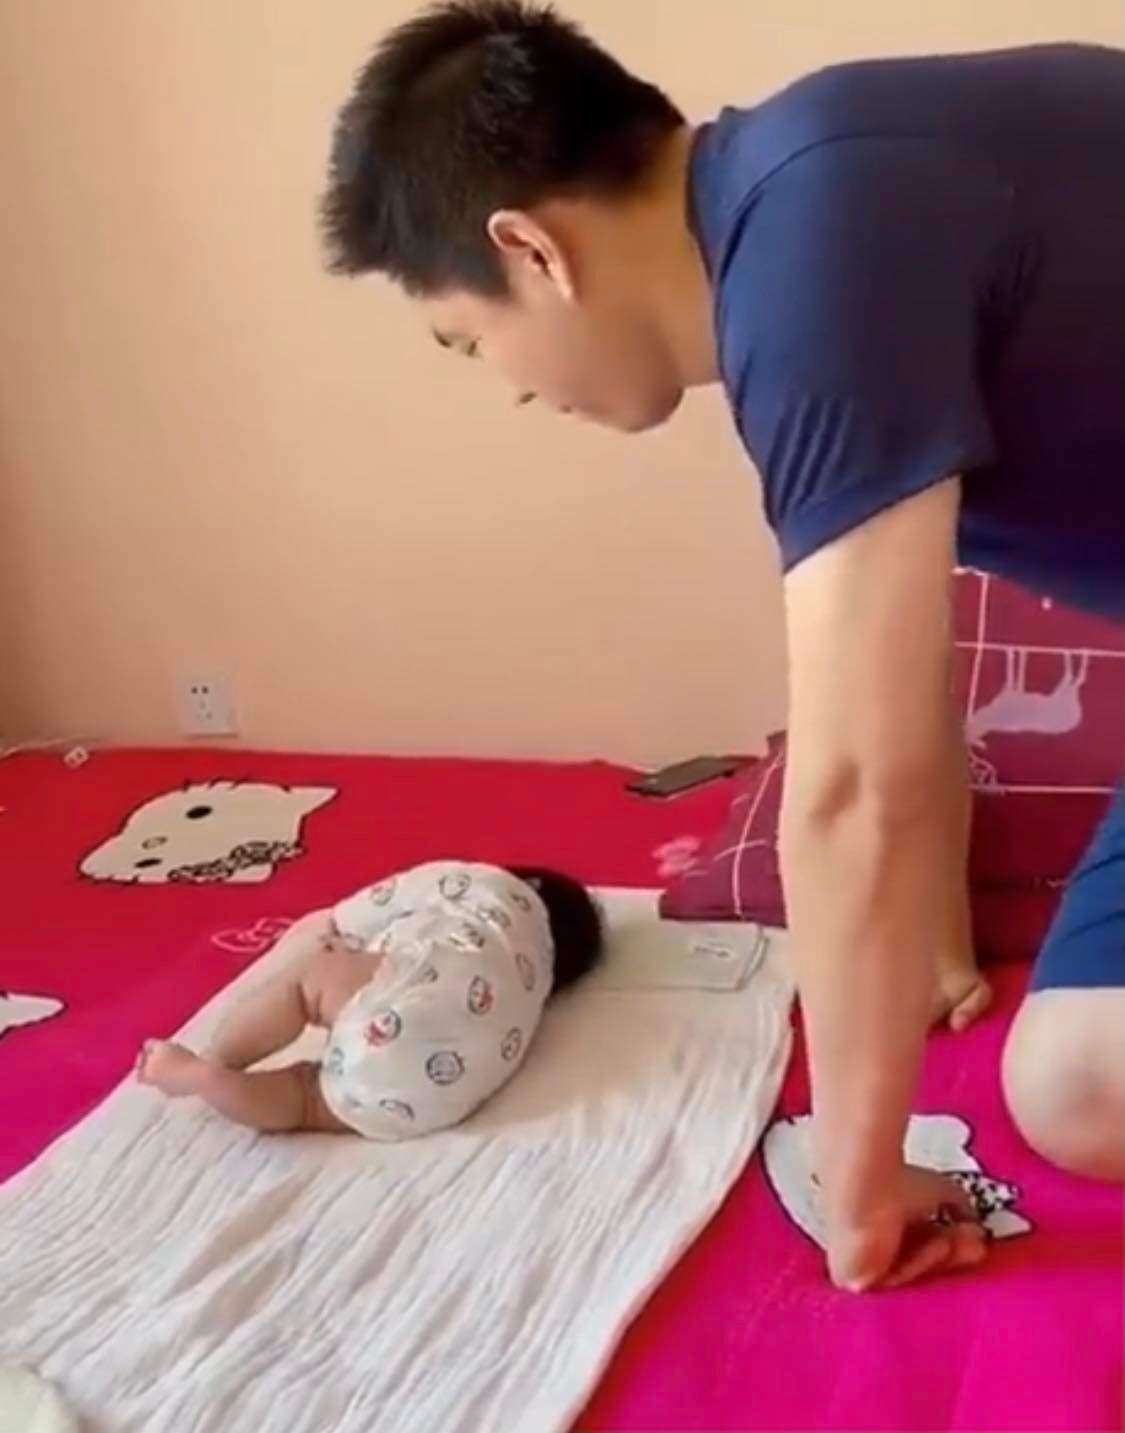 Clip of a young father 'holding his breath' putting his child to sleep on the bed made netizens laugh